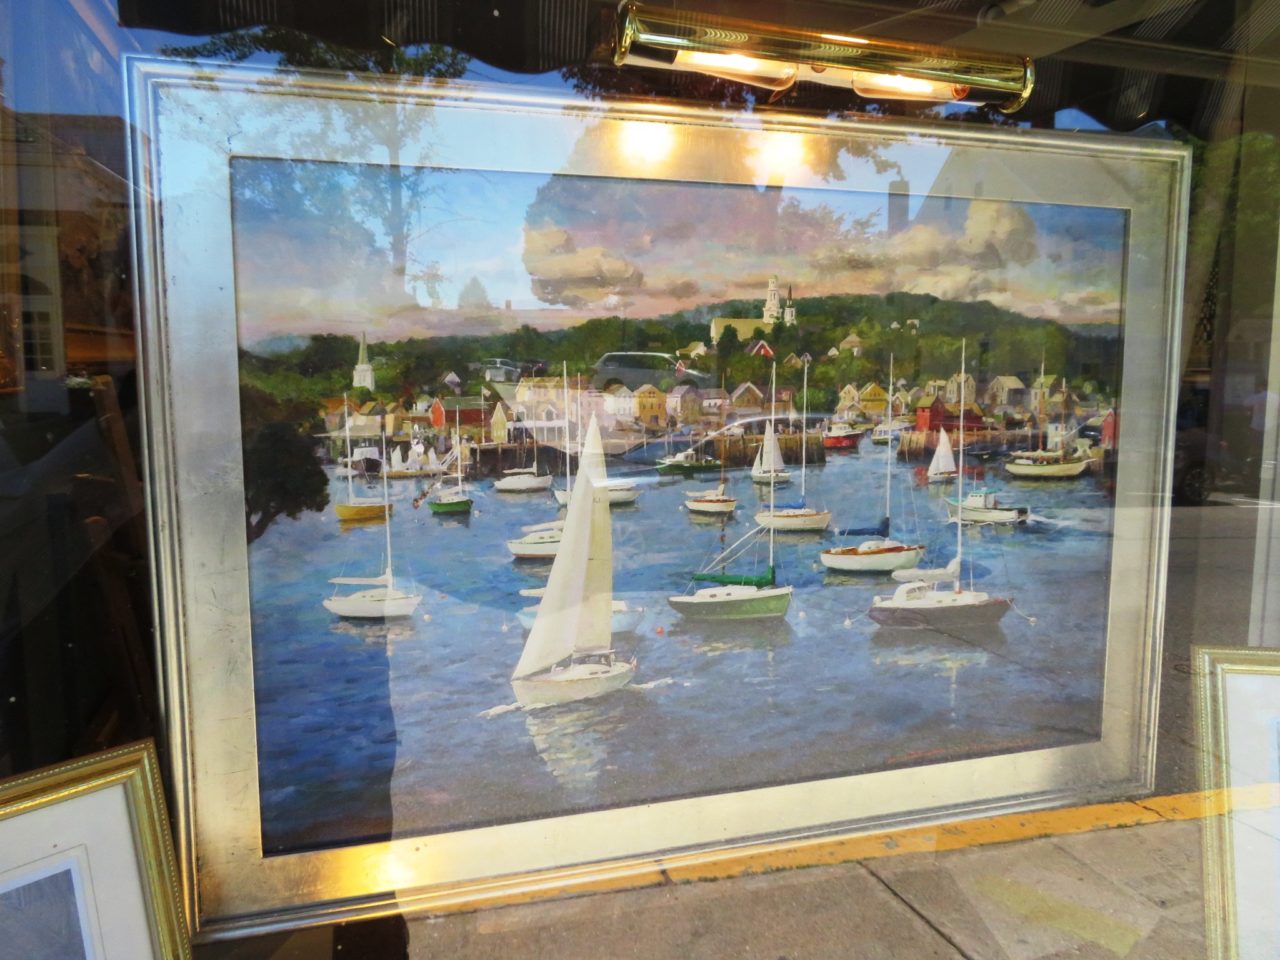 Emerson Inn by the Sea : One of many art galleries in Rockport MA